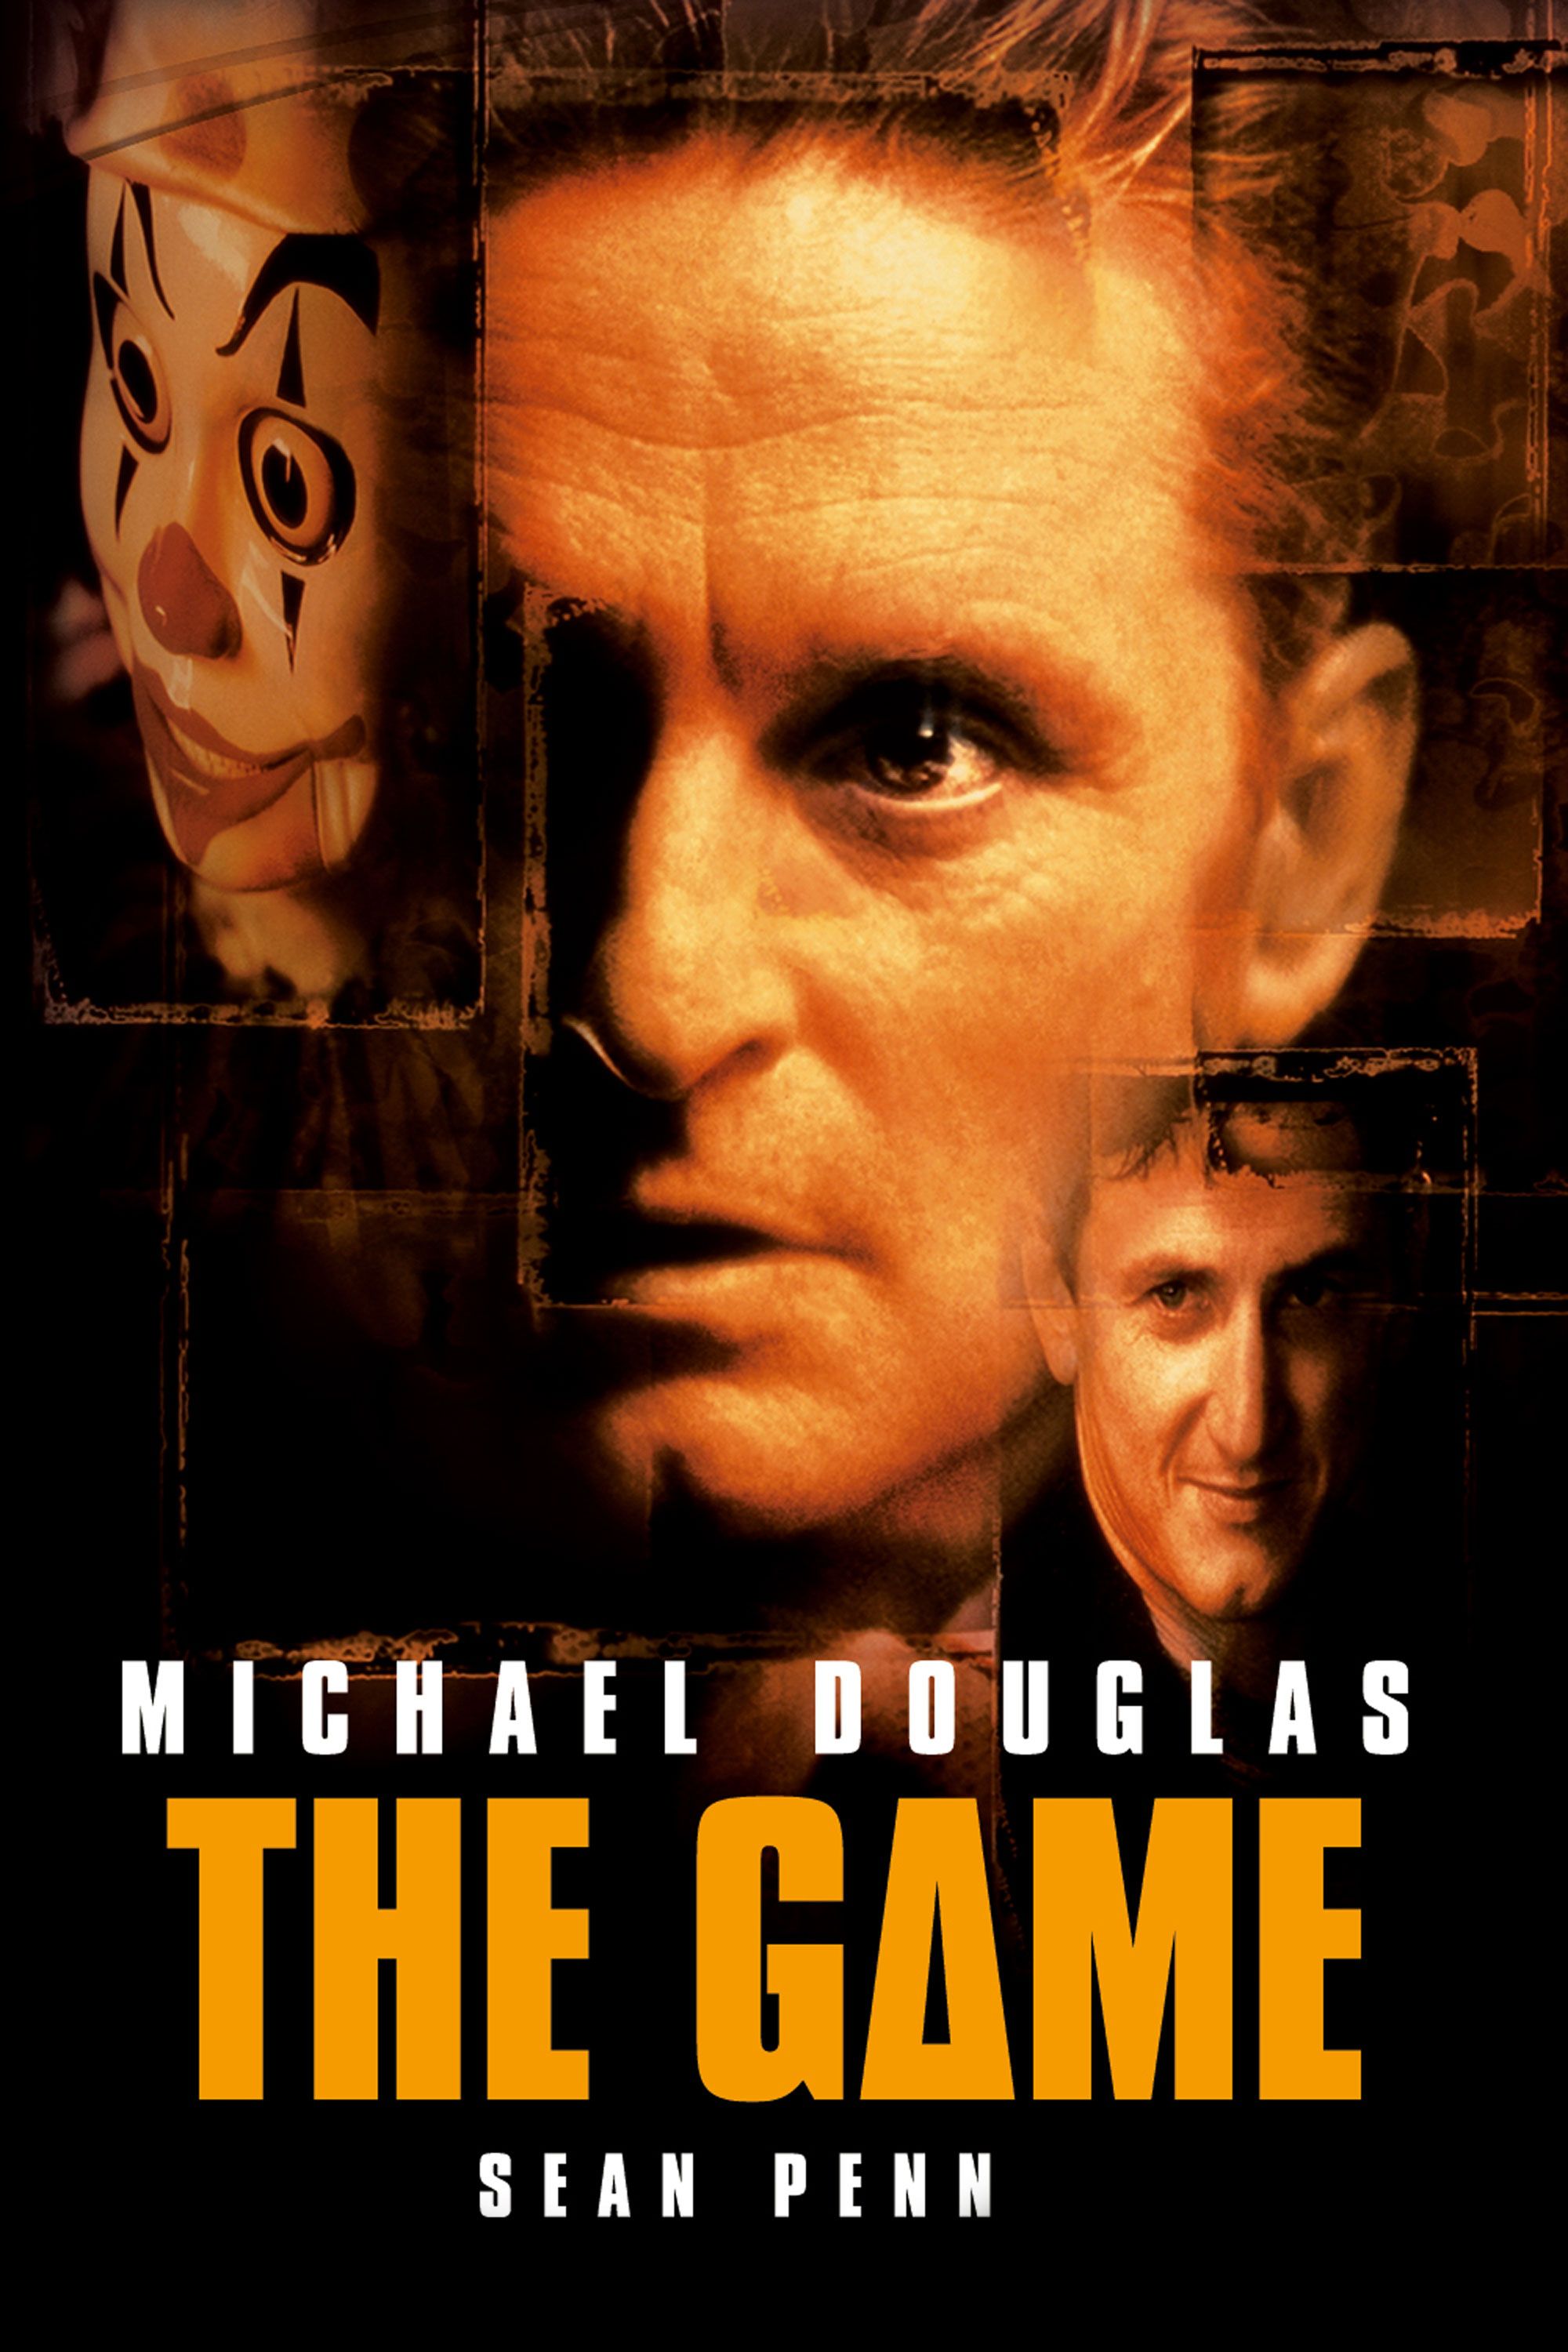 Play the Game (film) - Wikipedia